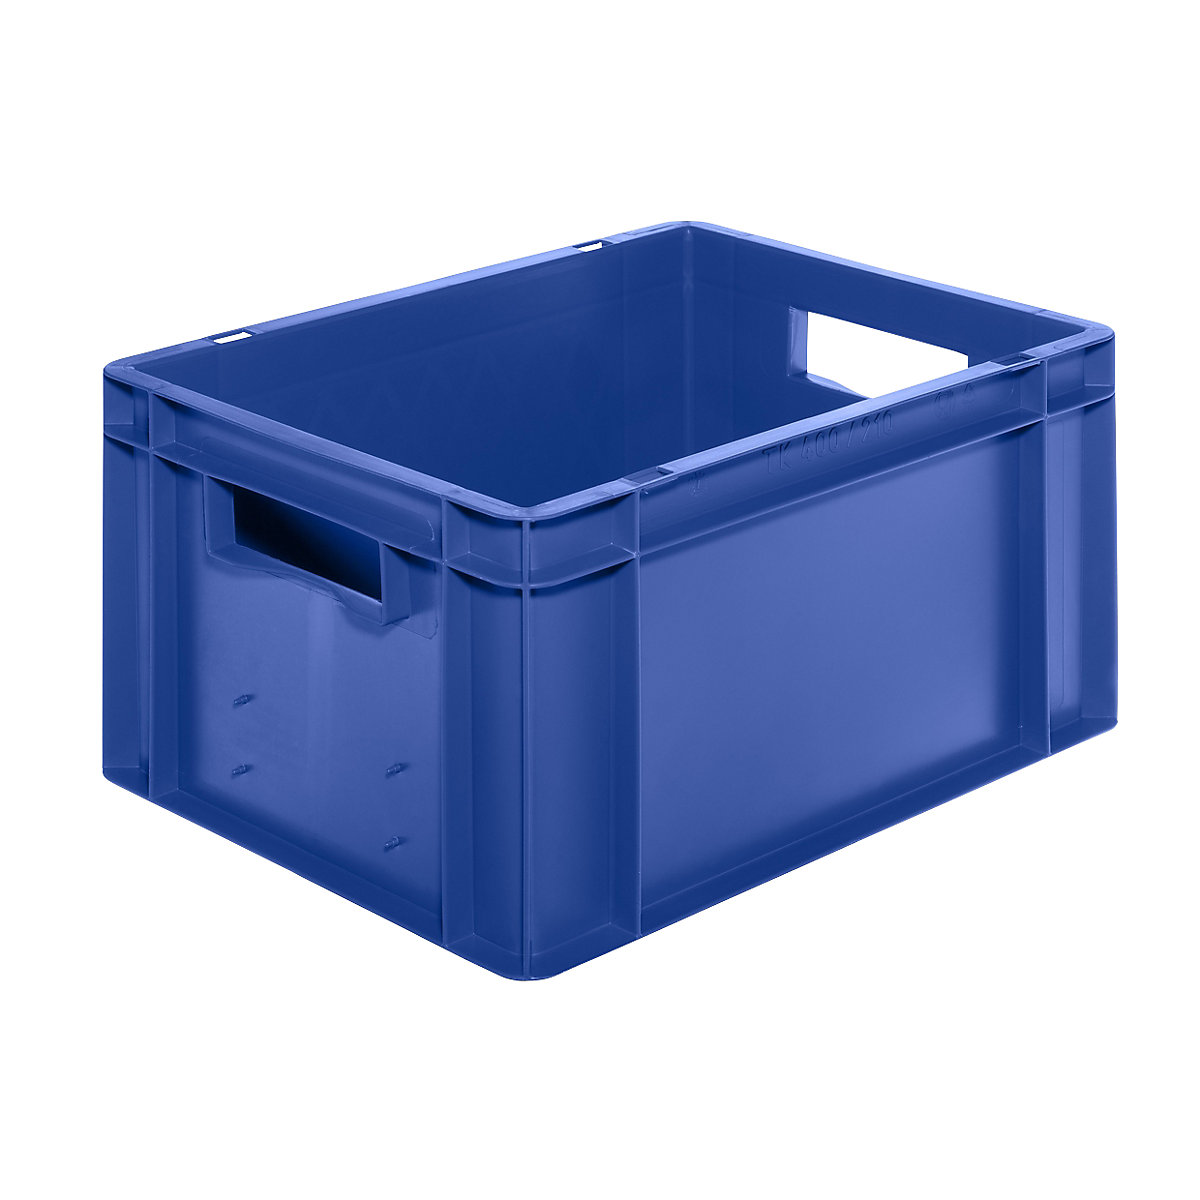 Euro stacking container, closed walls and base, LxWxH 400 x 300 x 210 mm, blue, pack of 5